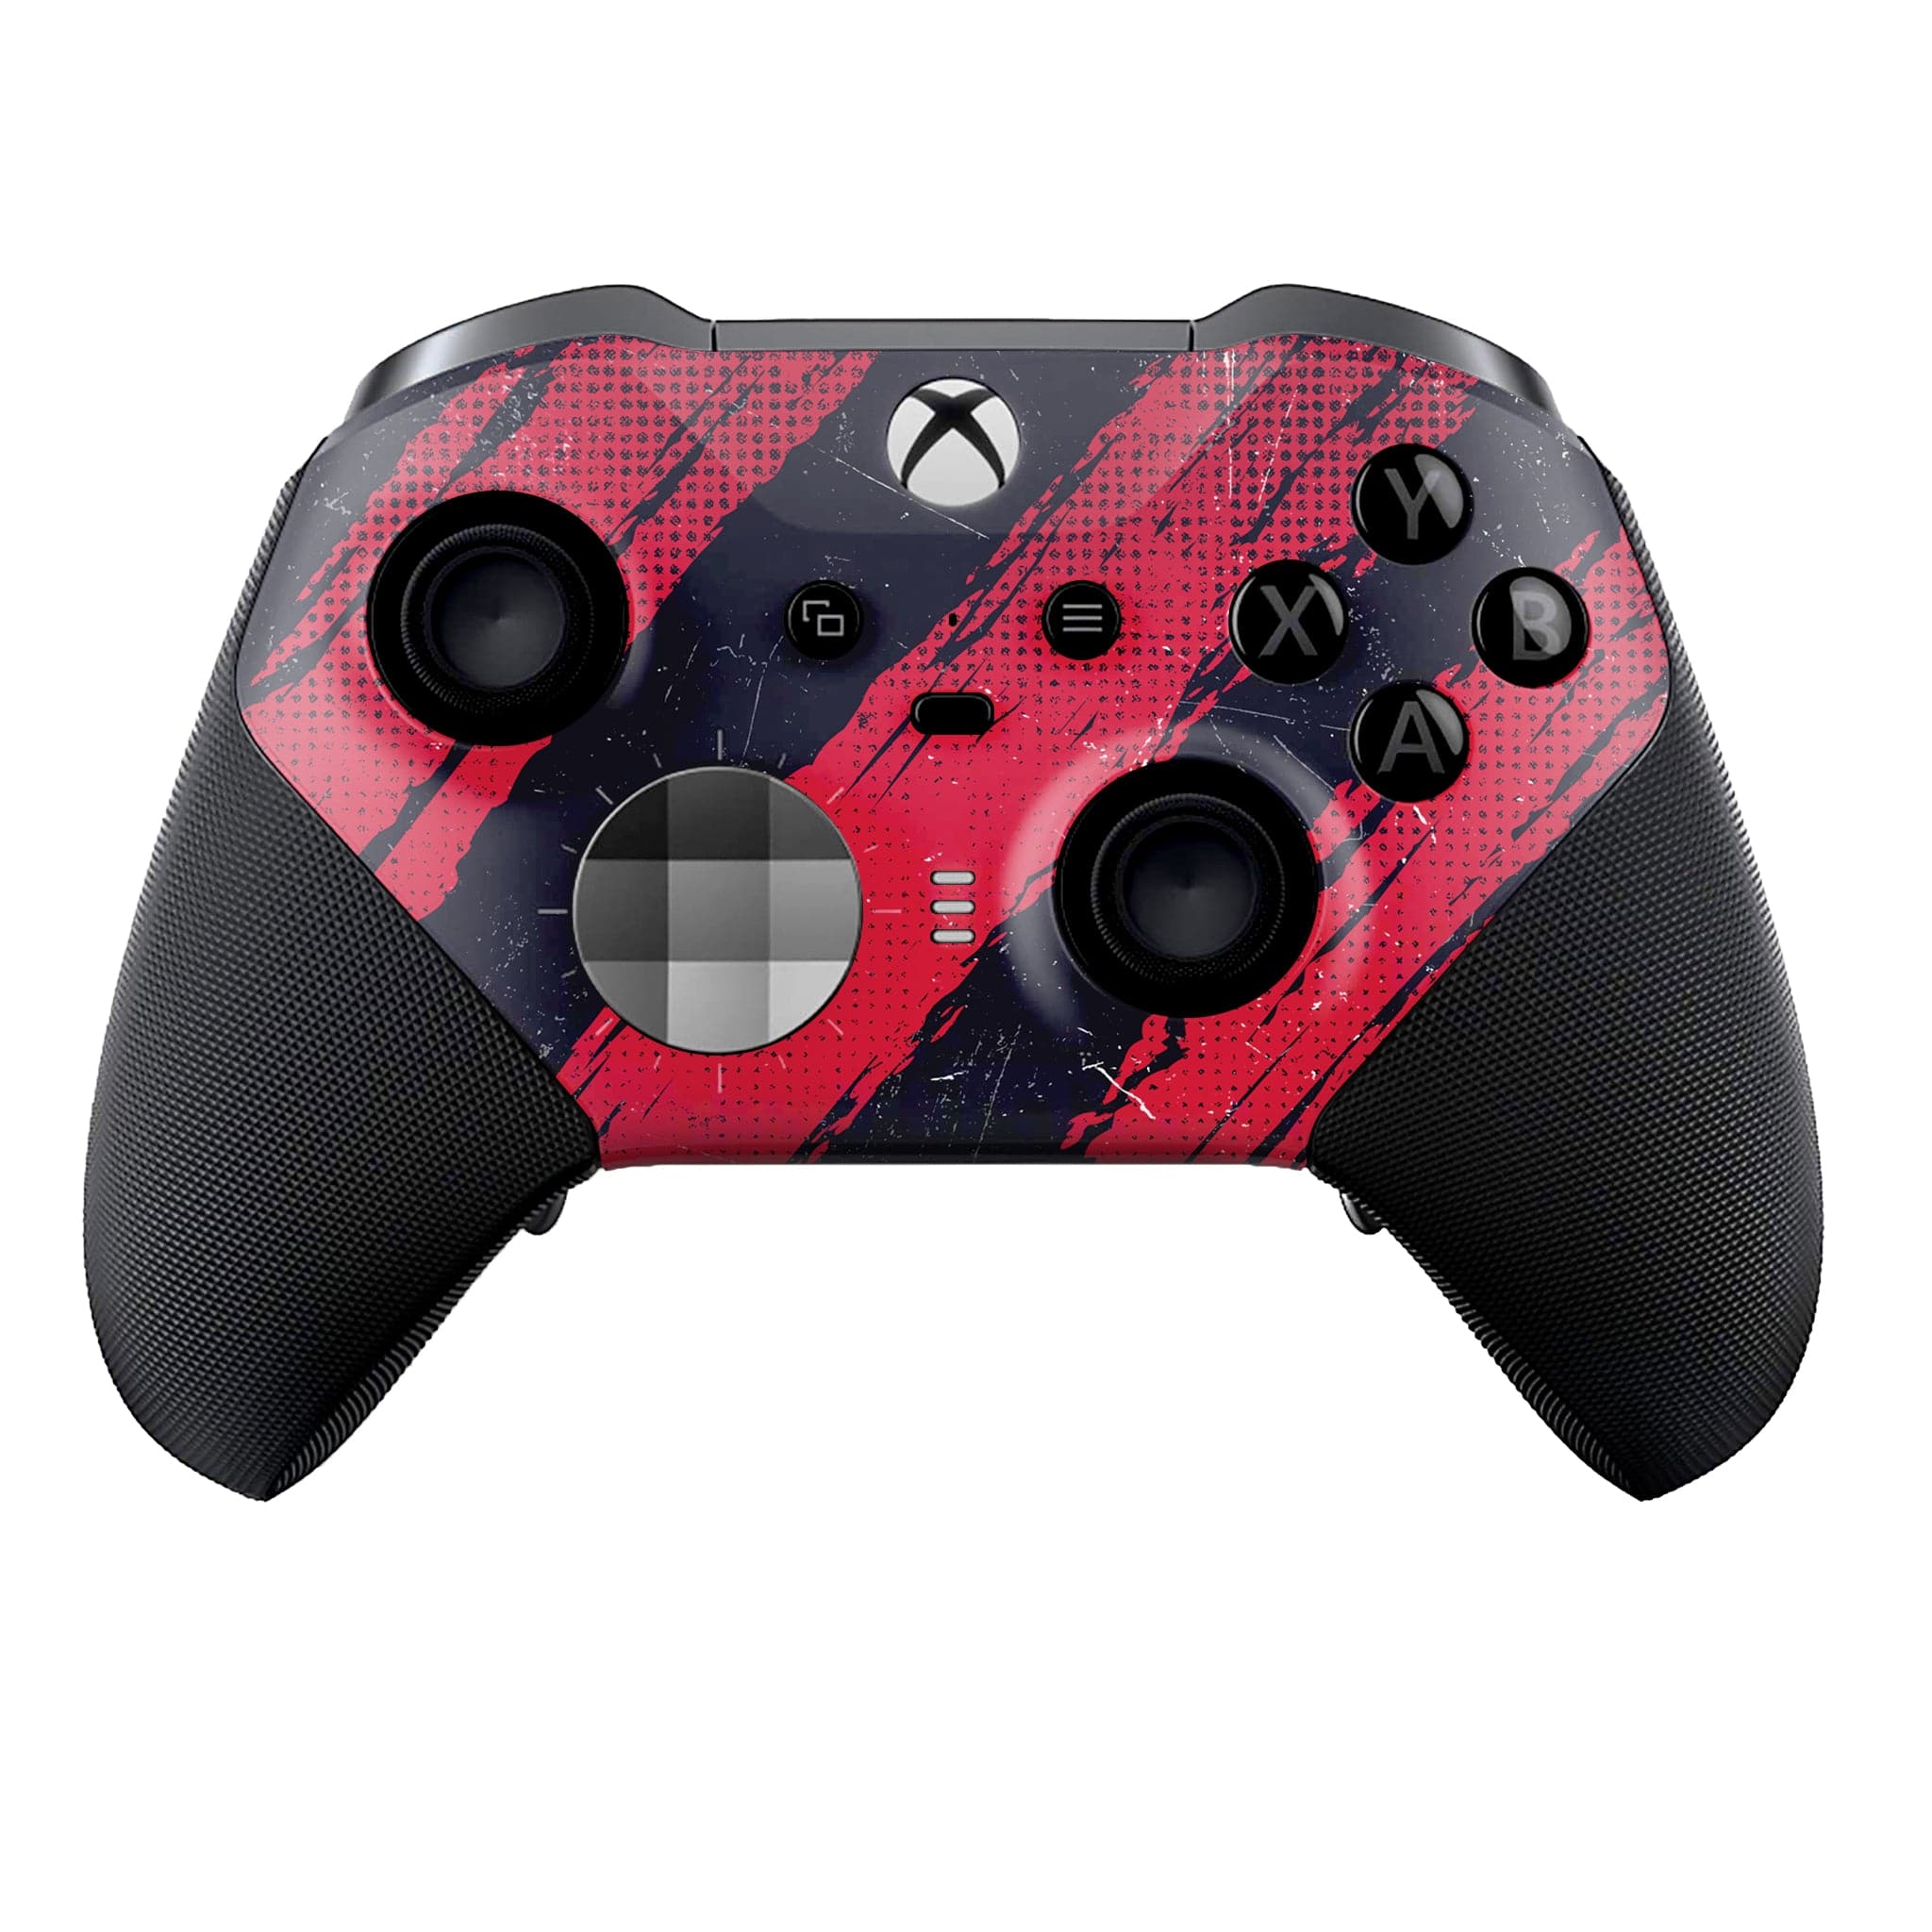 Ripper Red Xbox Elite Series 2 Controller: Use Nintendo Switch Controller on PC